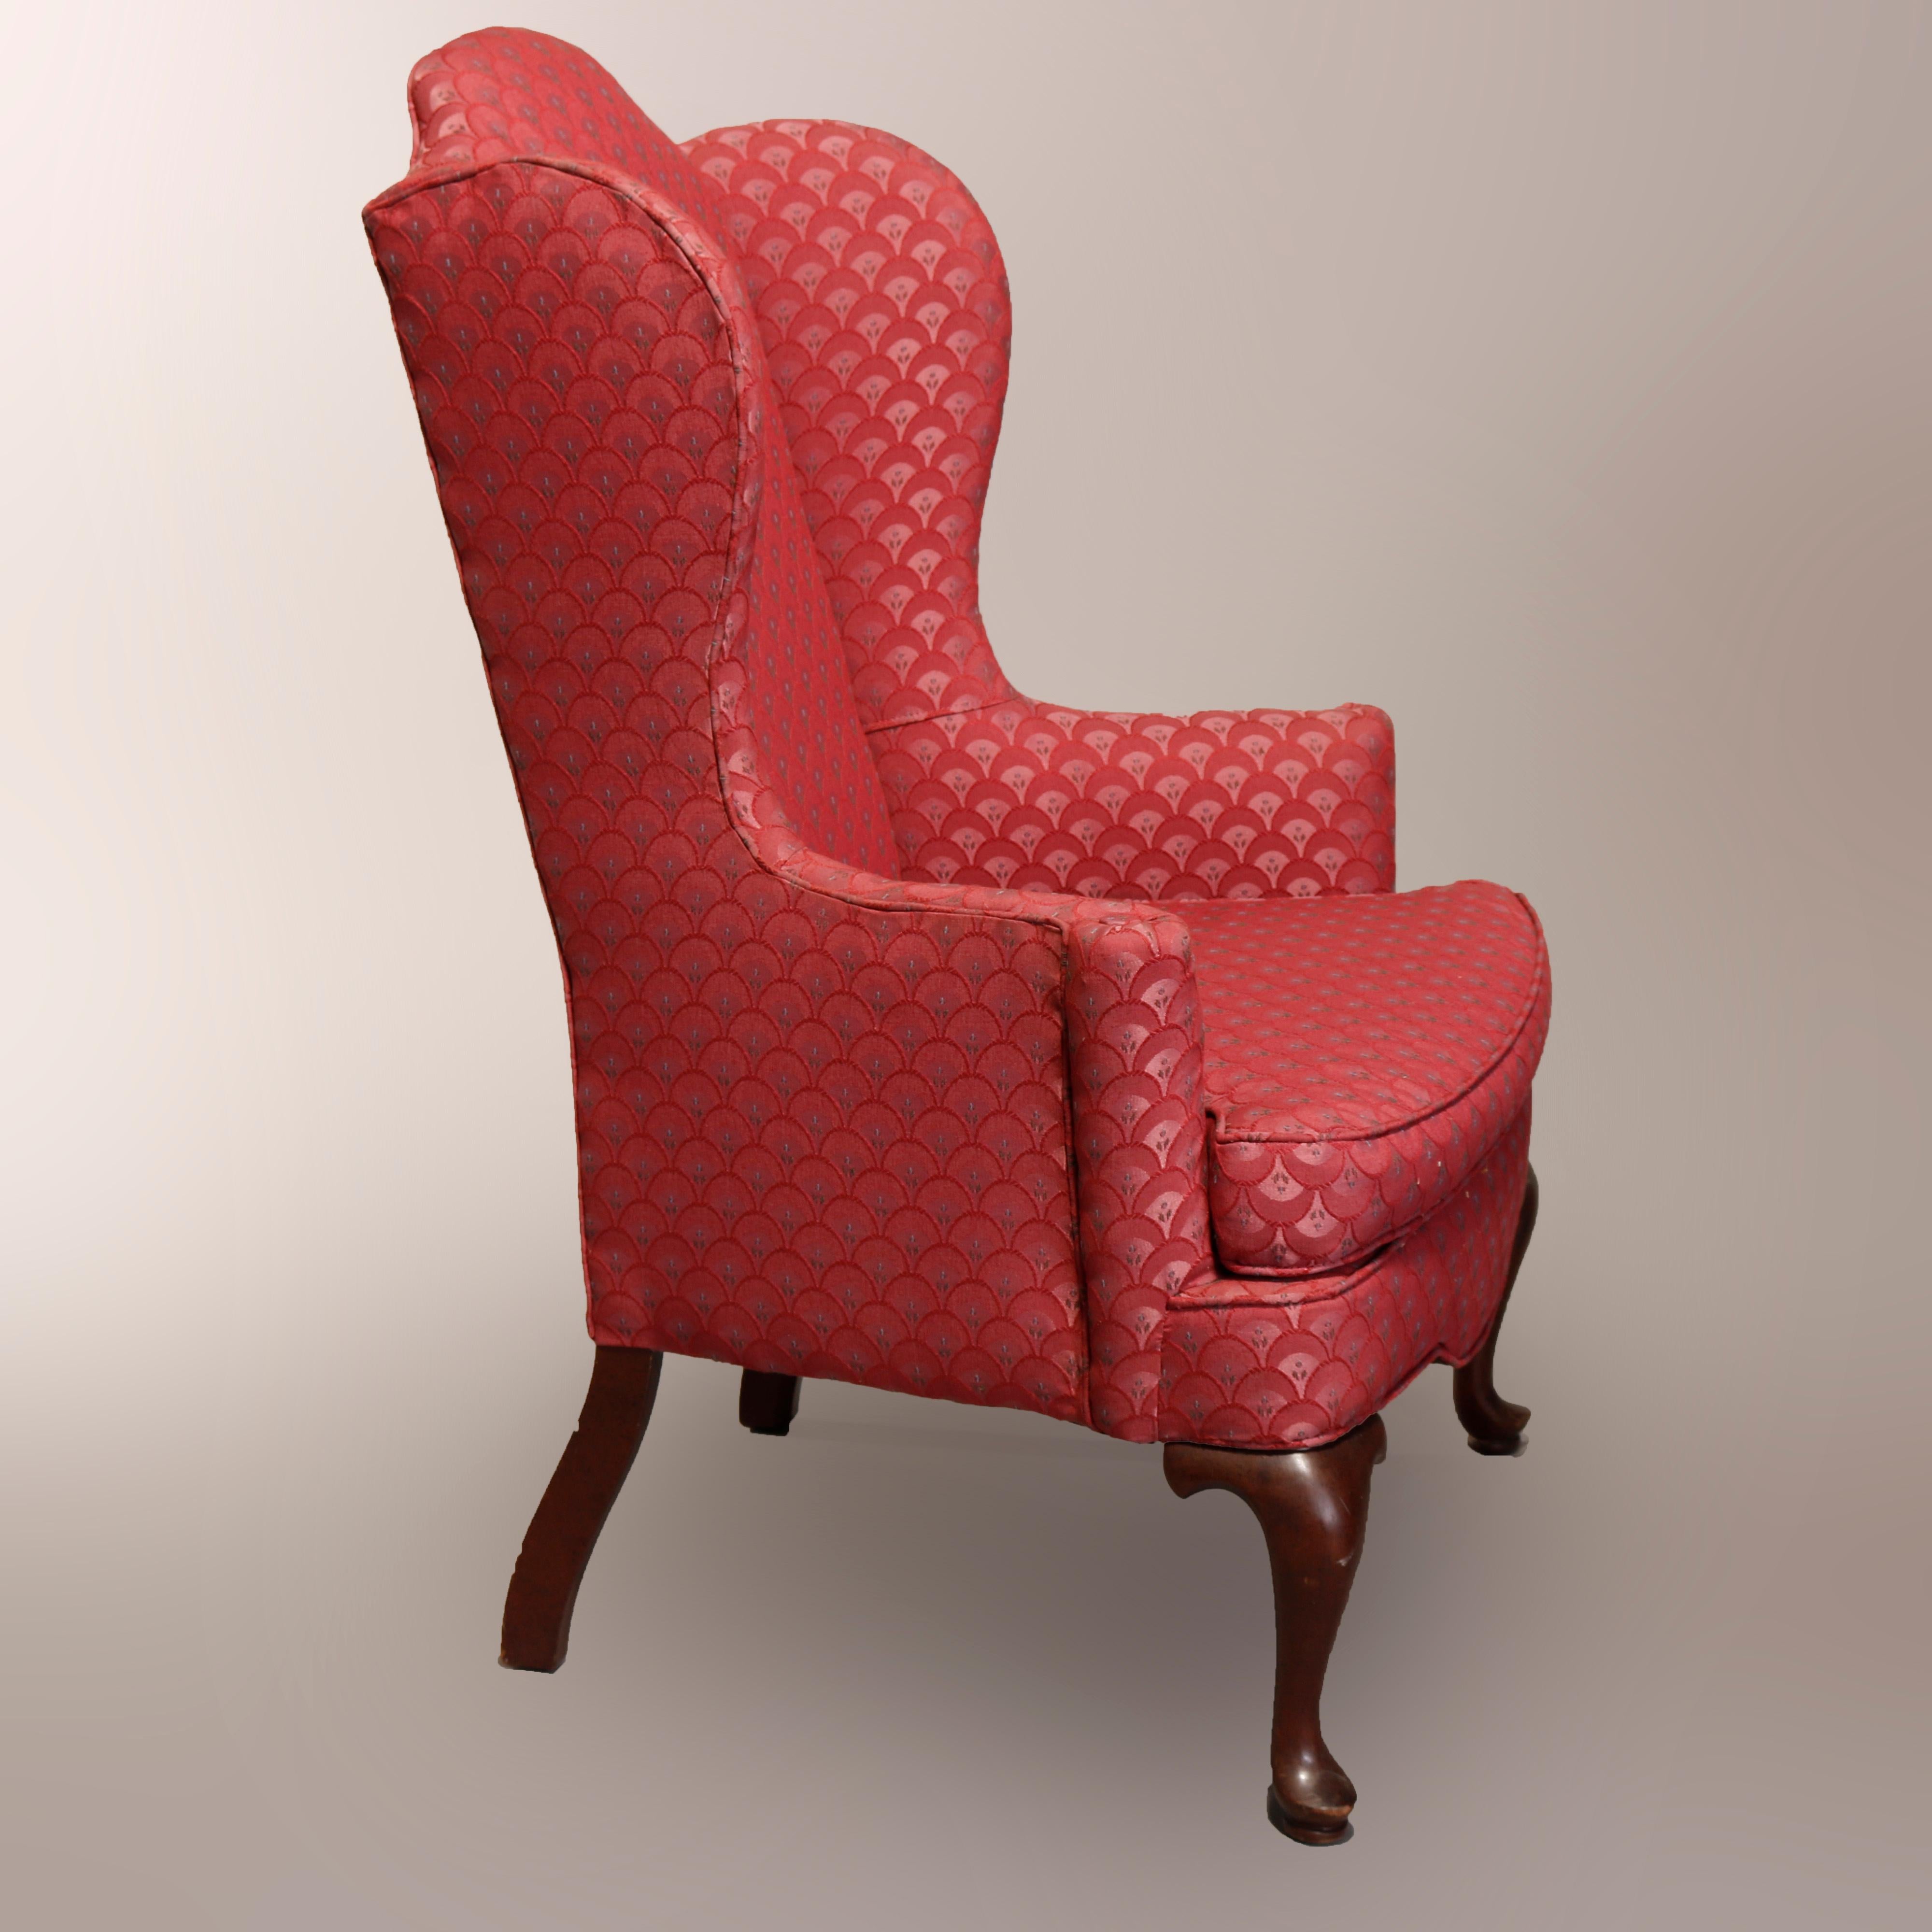 A vintage pair of Queen Anne style upholstered fireside chairs offer shaped crest over wing back and scroll form arms, raised on mahogany cabriole legs terminating in pad feet, 20th century

Measures: 45.5